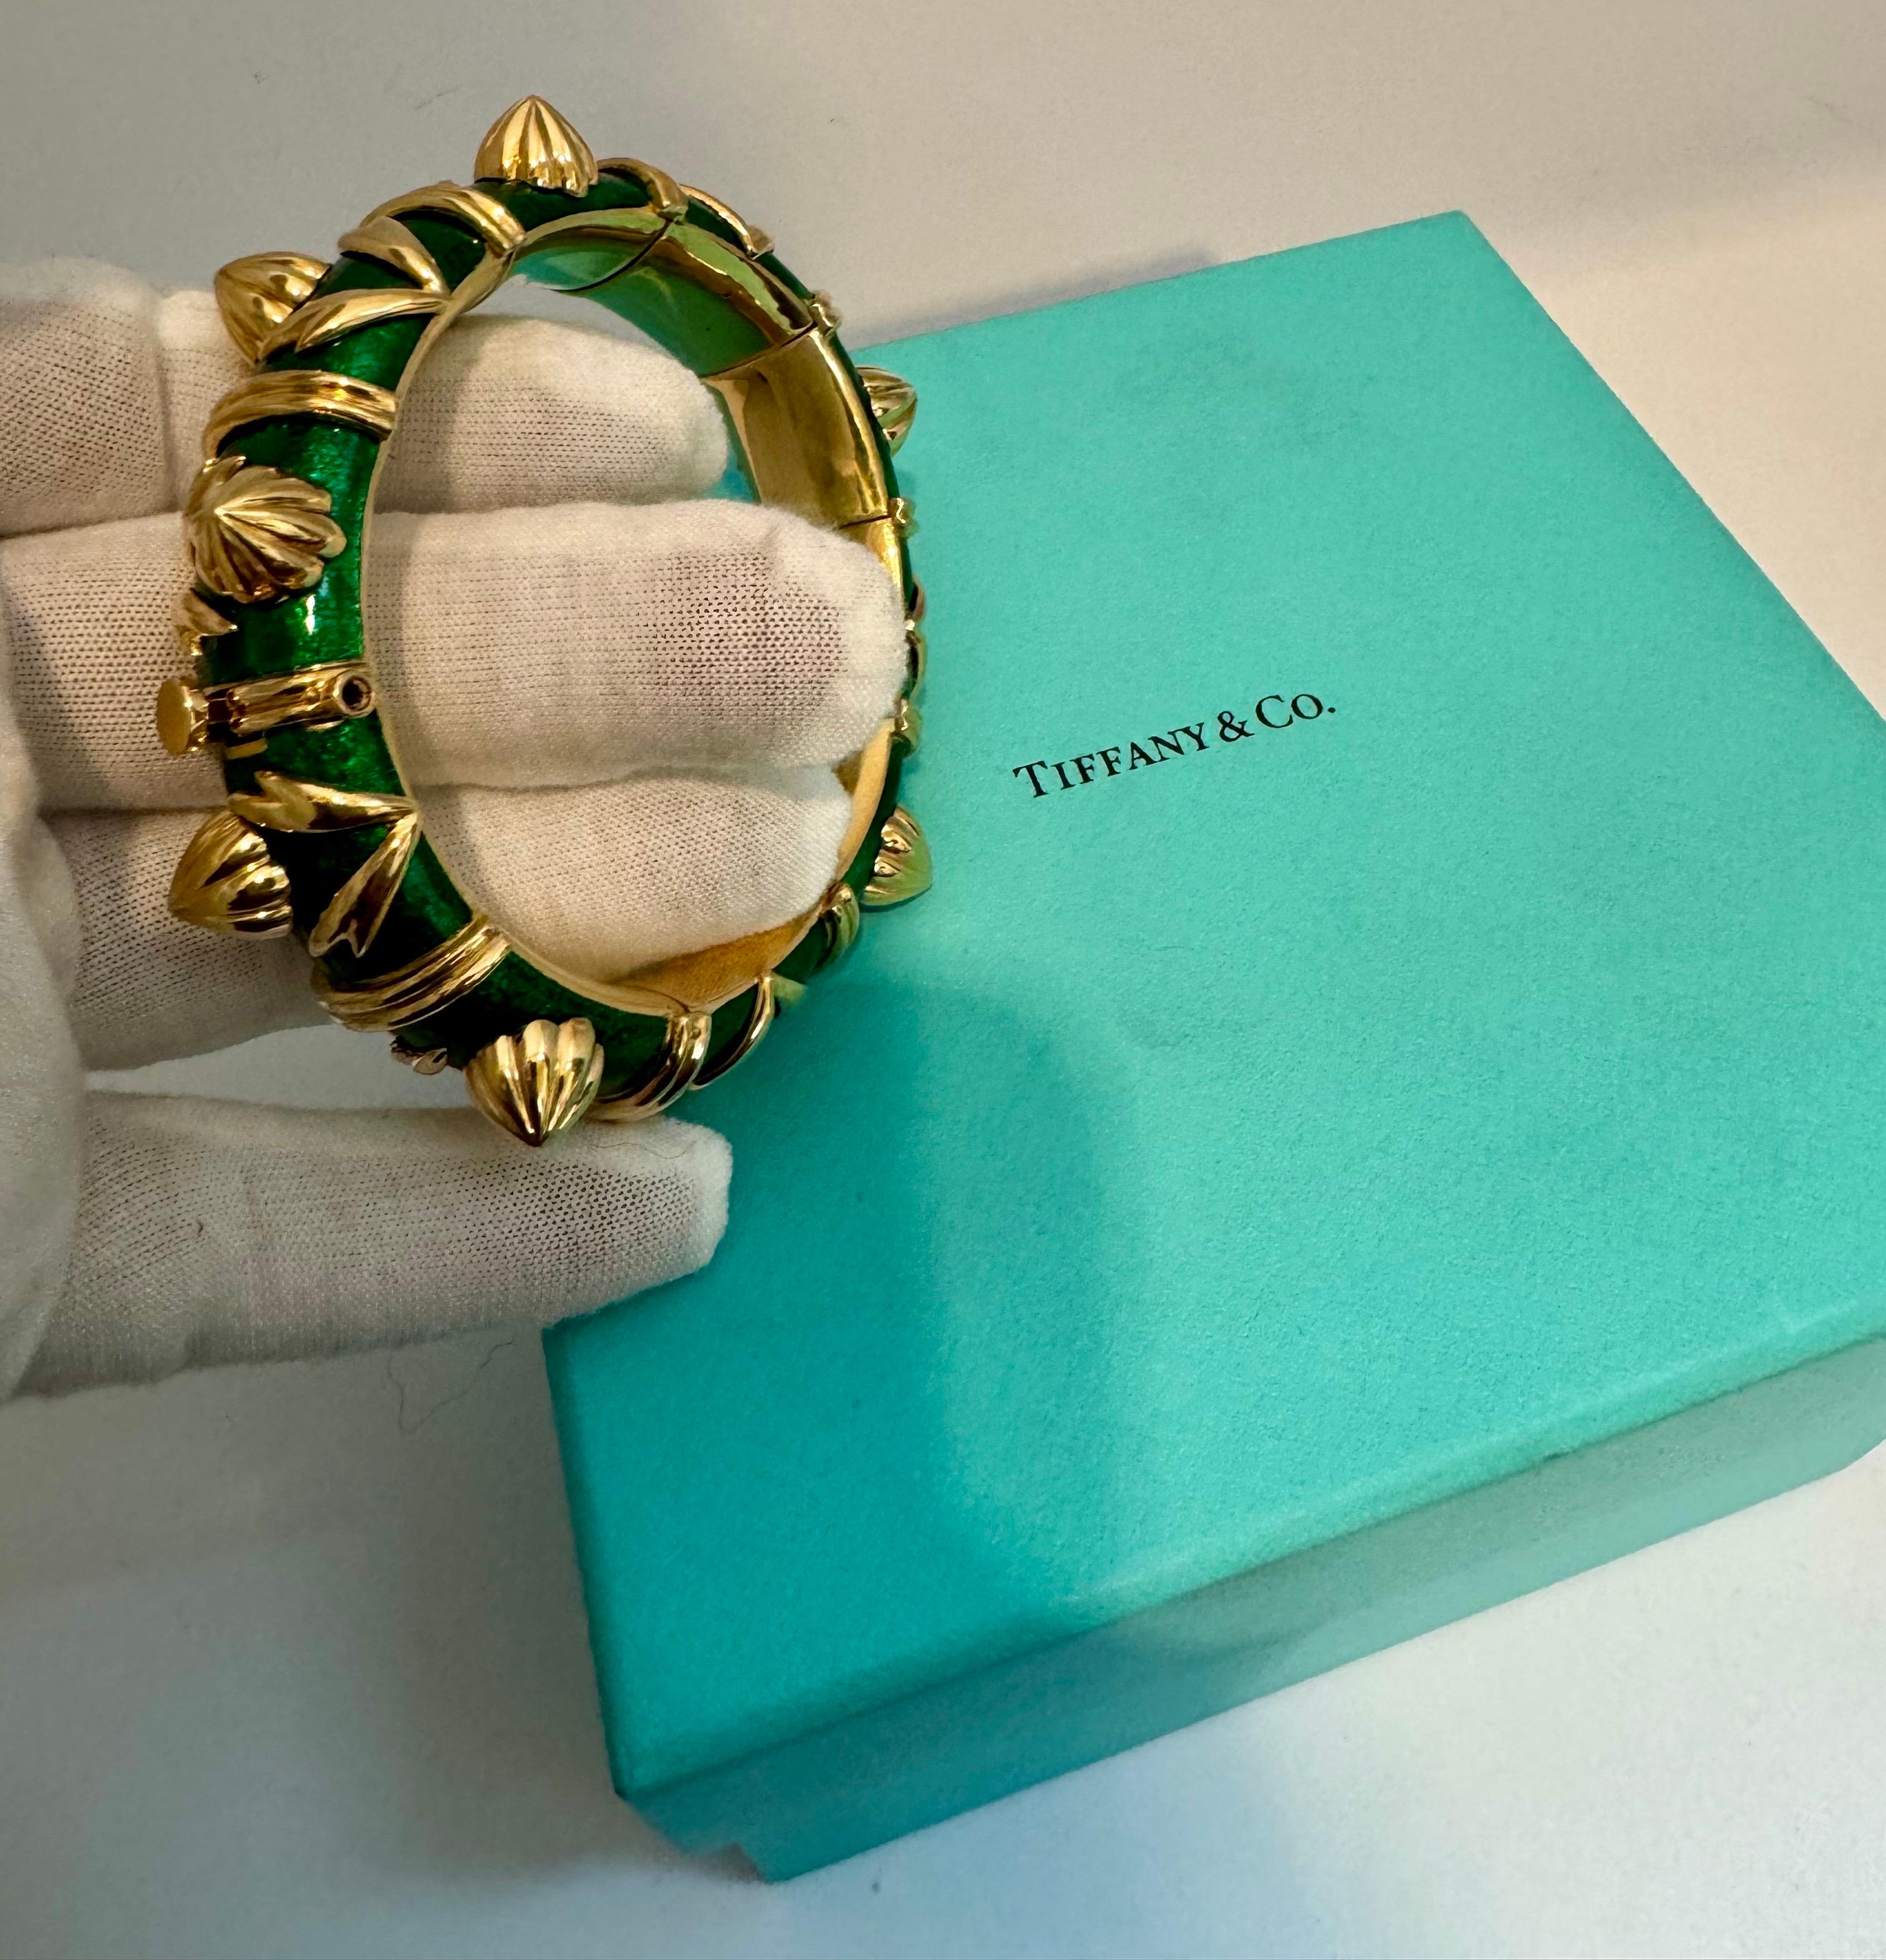 Tiffany & Co. Schlumberger Cone Losange Green Enamel Bangle Bracelet  138 gm 18K In Excellent Condition For Sale In New York, NY